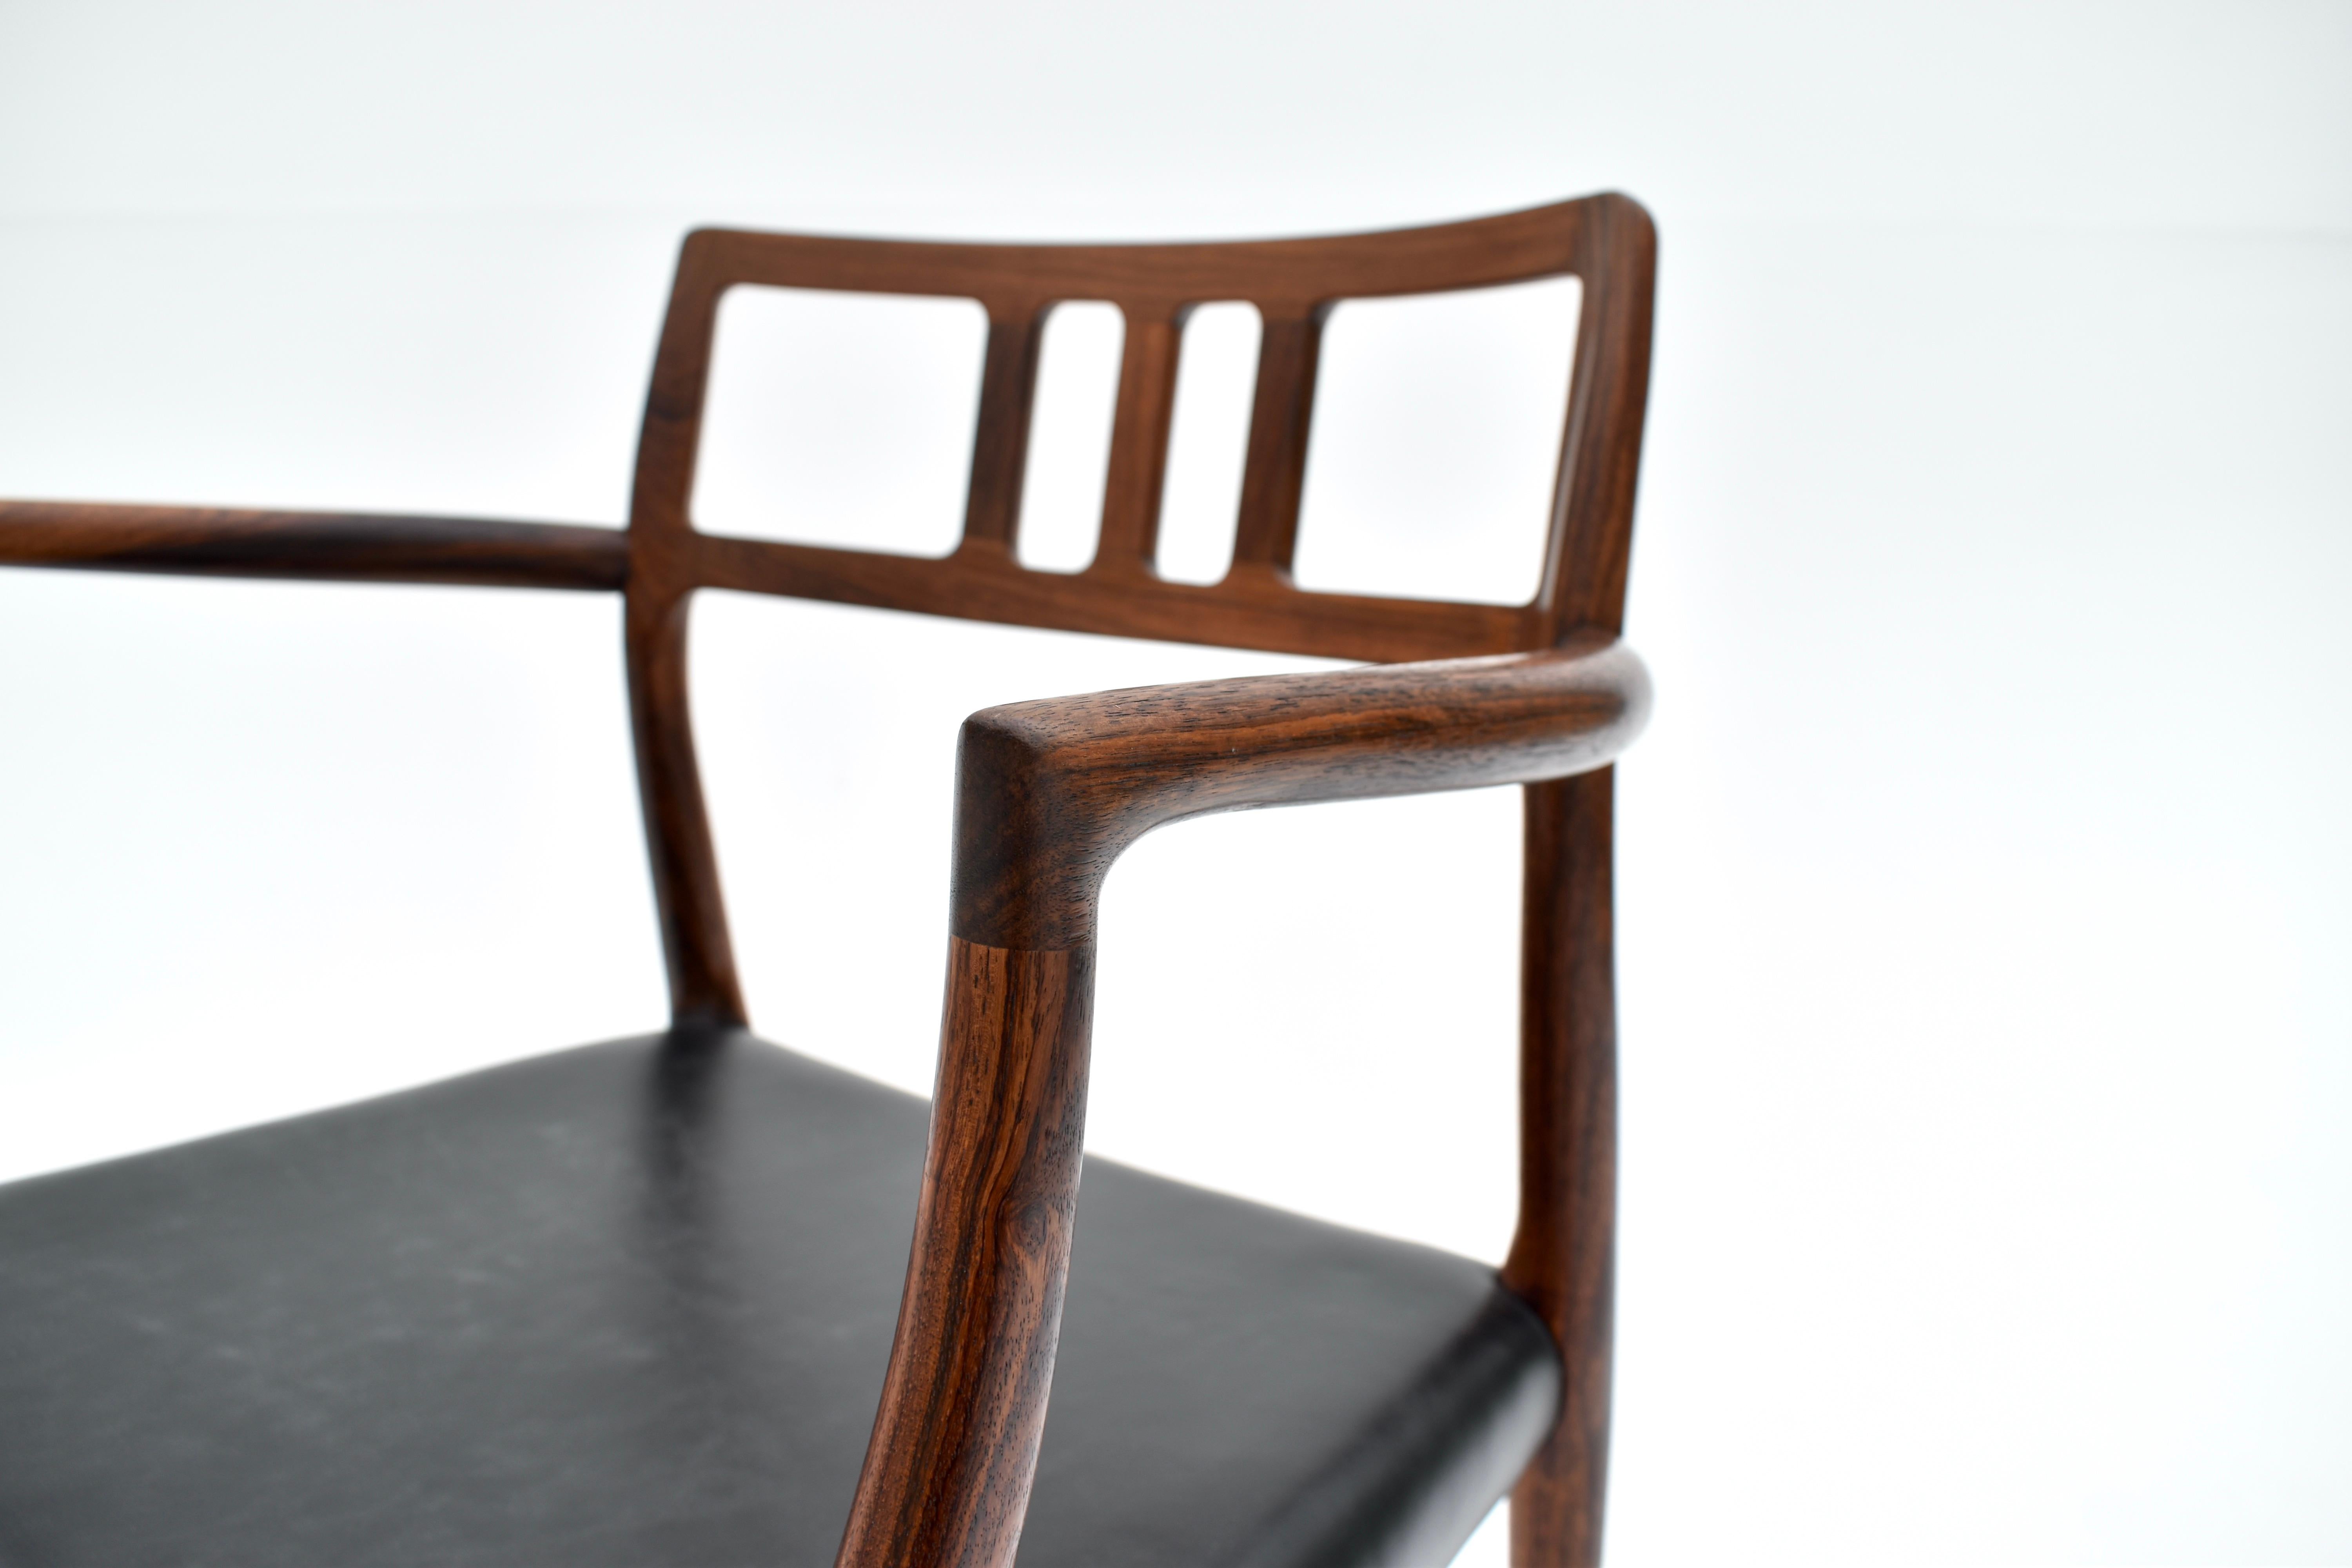 Solid Rosewood and black leather armchair designed by Niels Moller in 1966 for J L Mollers Mobelfabrik.

A highly sought after and rarely seen chair. A Danish design Classic, this design is a showcase for the craftsmanship and and fastidious